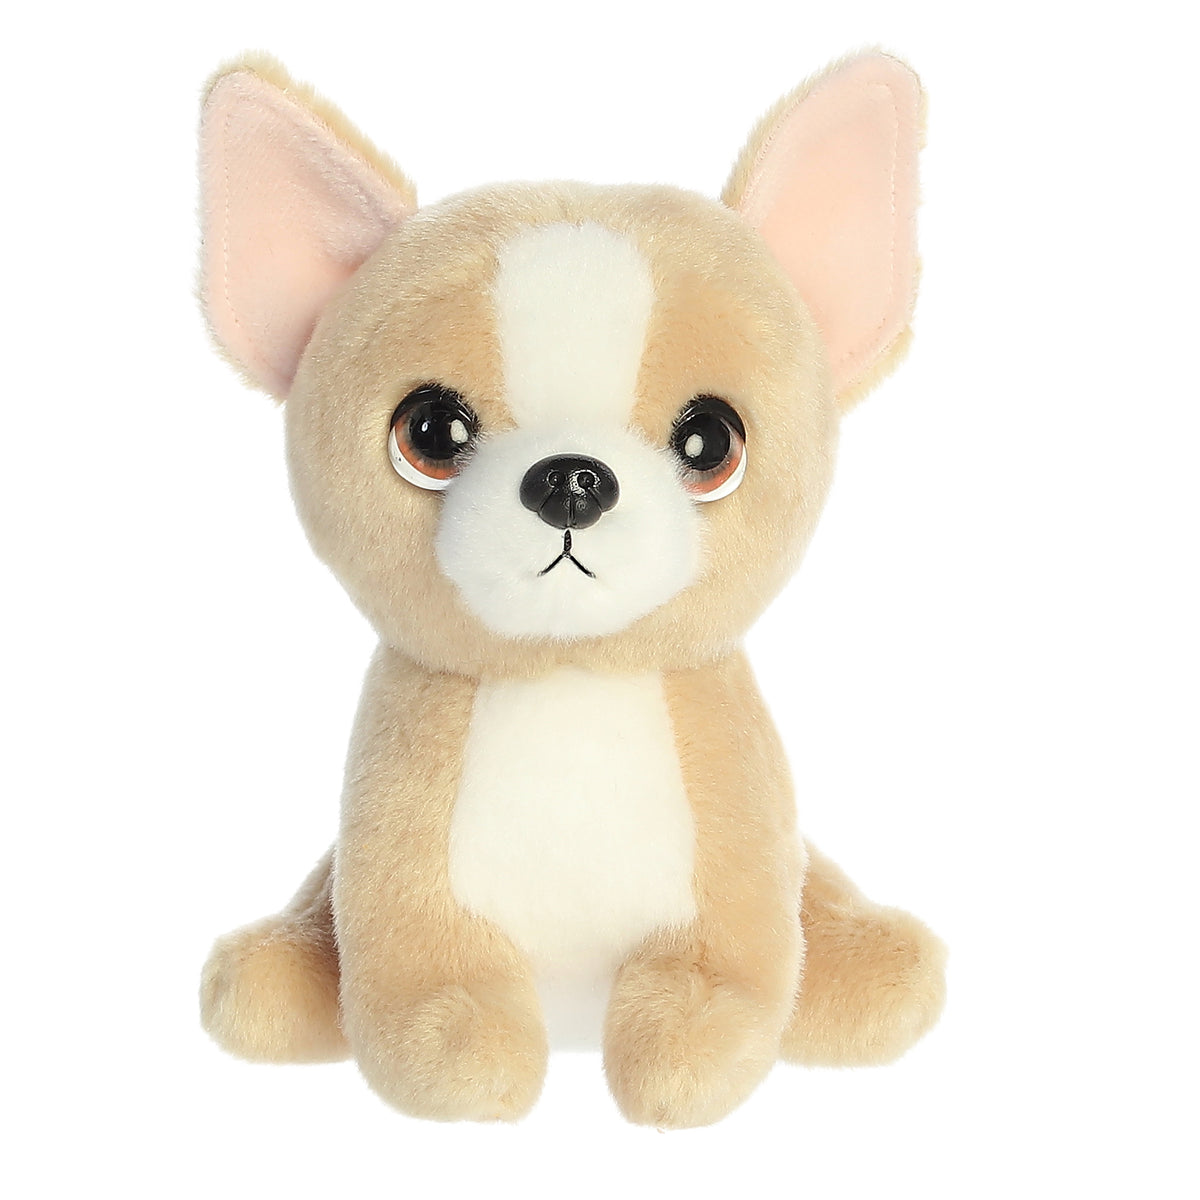 Somi Corgi plush with tan body, white belly, and sparkling eyes from the Petites collection by Aurora stuffed animals.